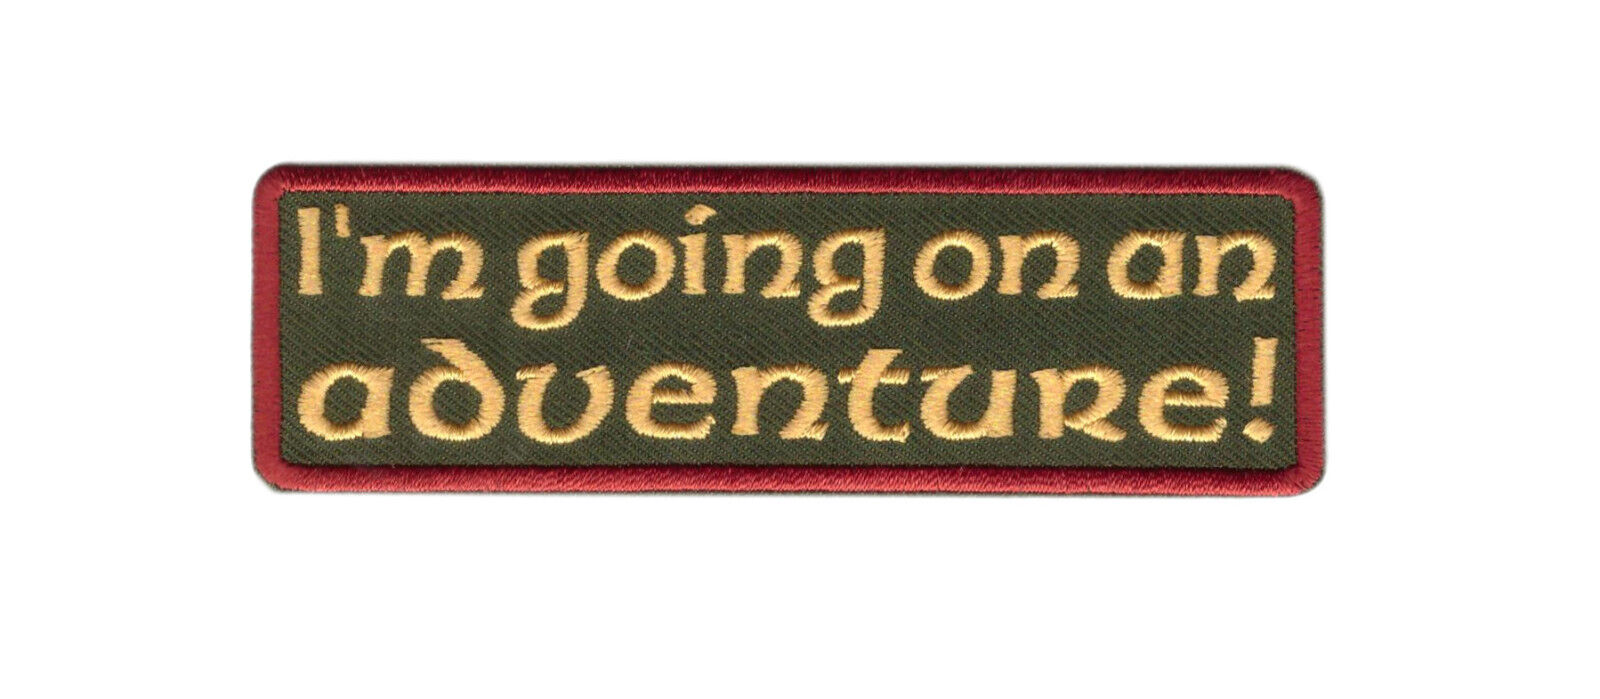 Going On an Adventure Hobbit Patch Iron on